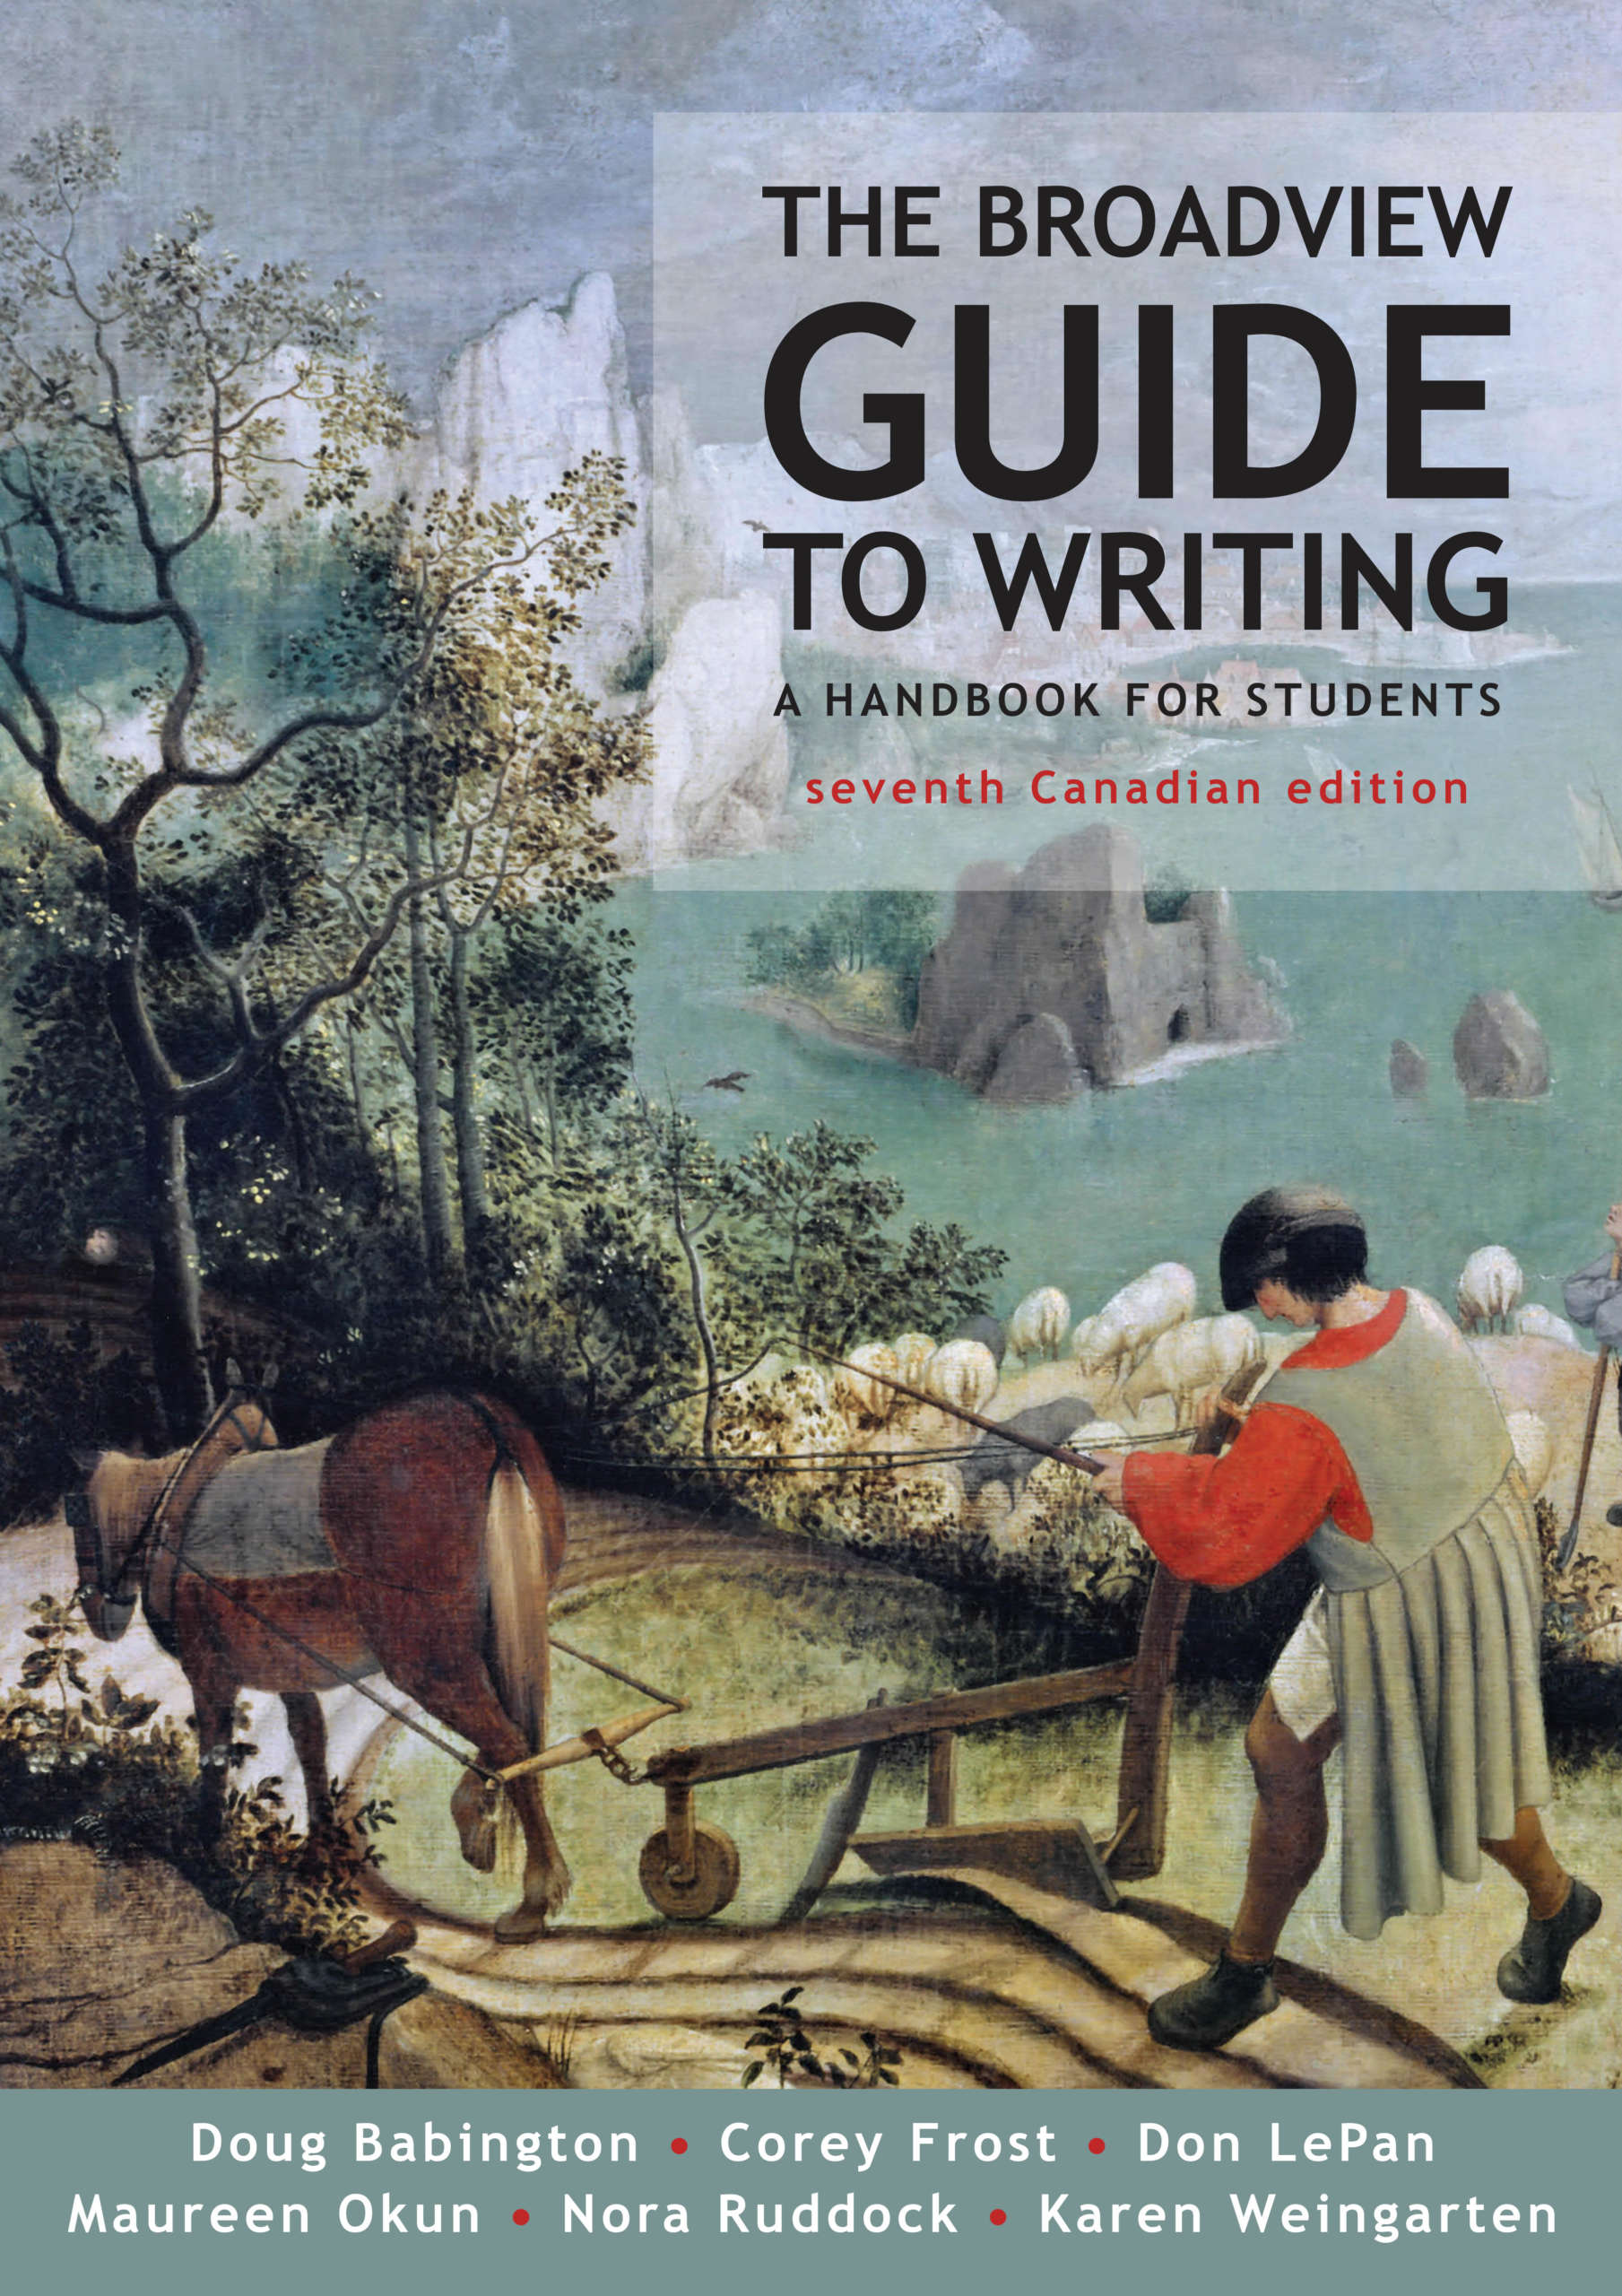 The Broadview Guide to Writing, 7th edition